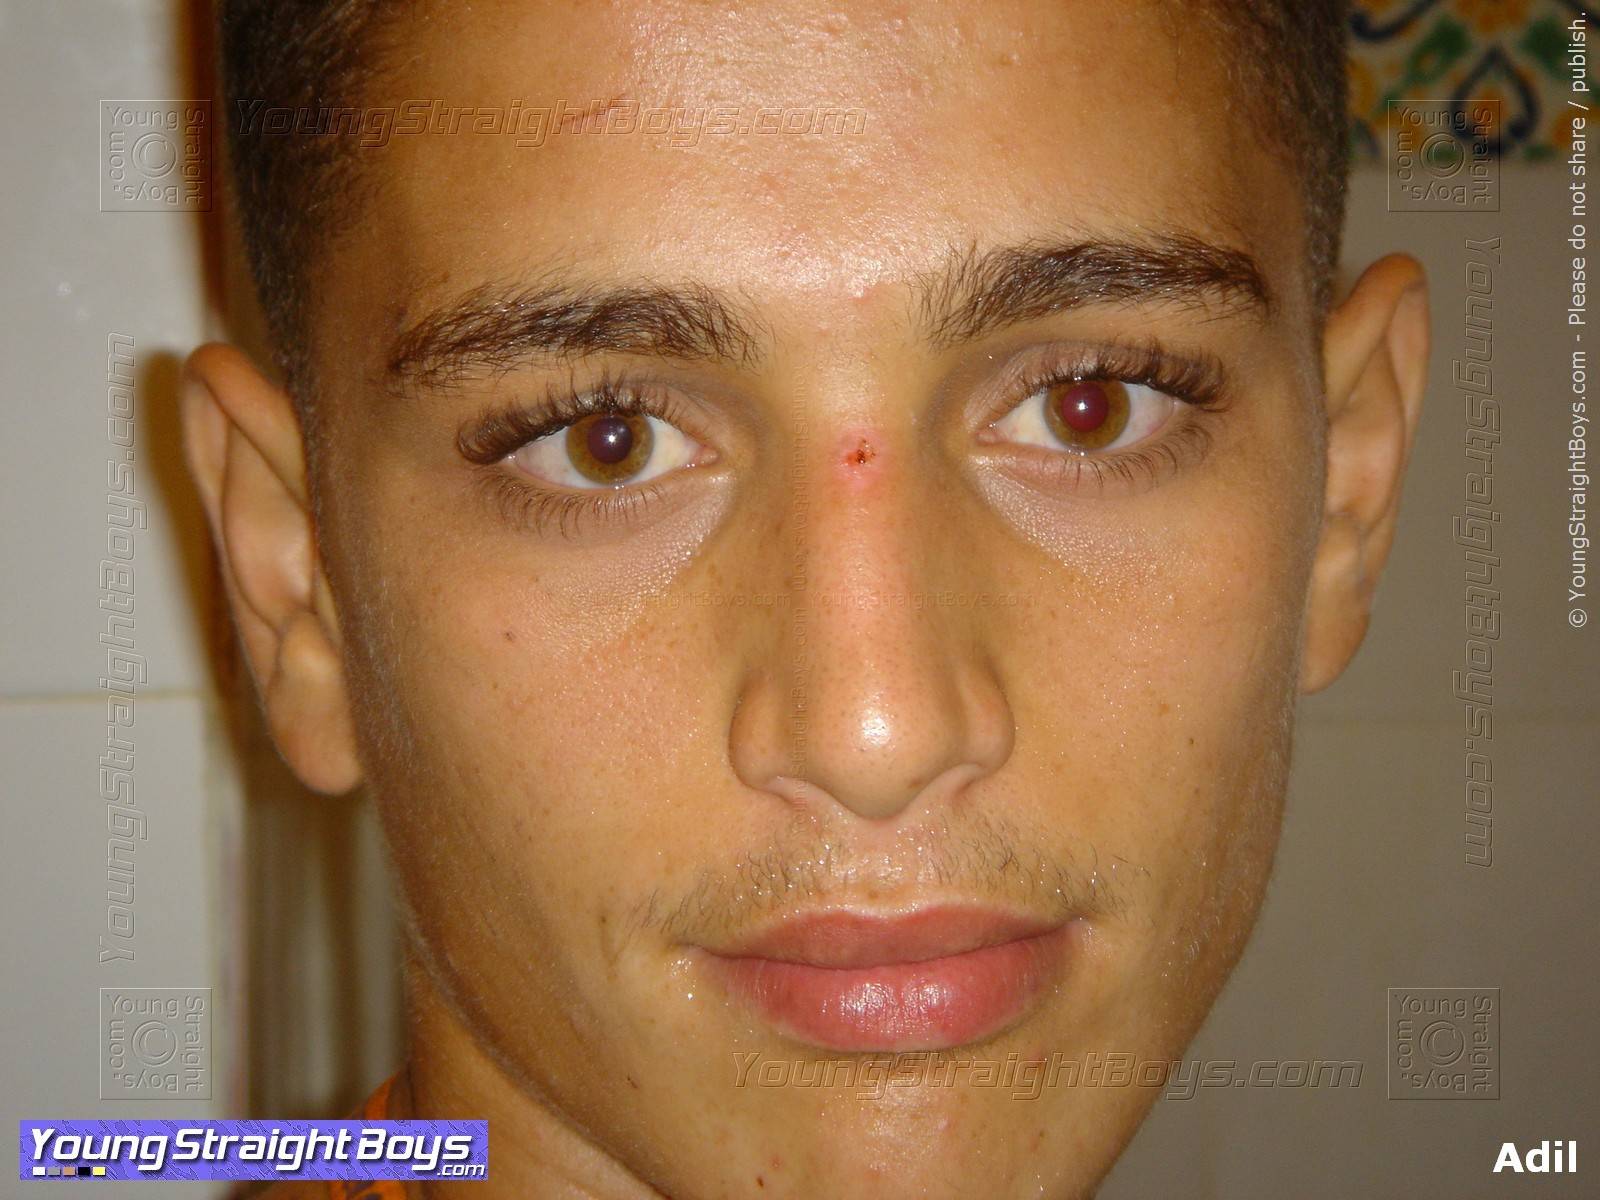 Handsome Arab straight boy Adil face pic